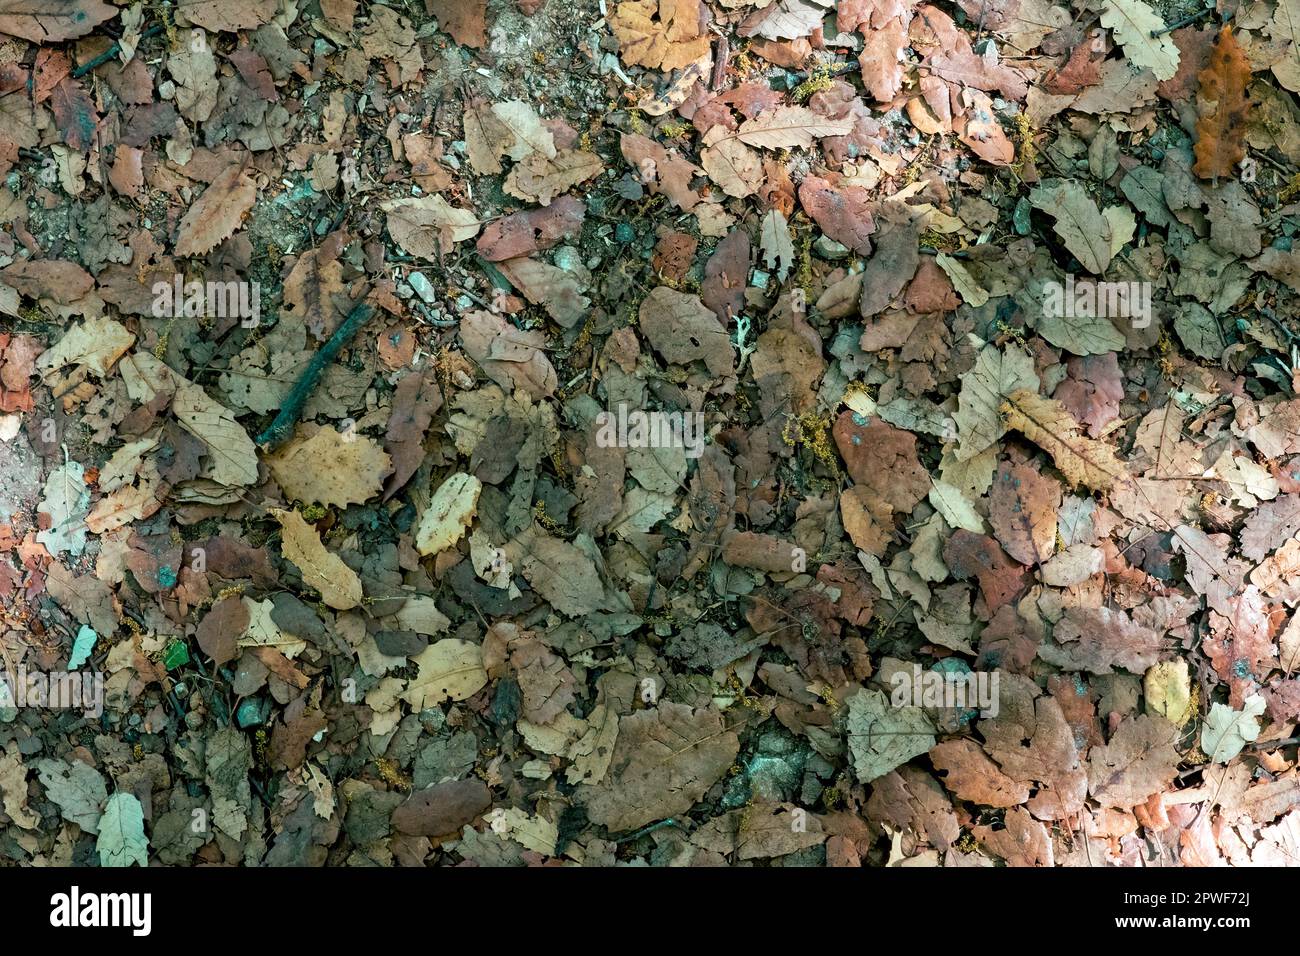 Nature background. Many dry leaves of different shapes deposited on the forest floor. Autumnal background. Stock Photo